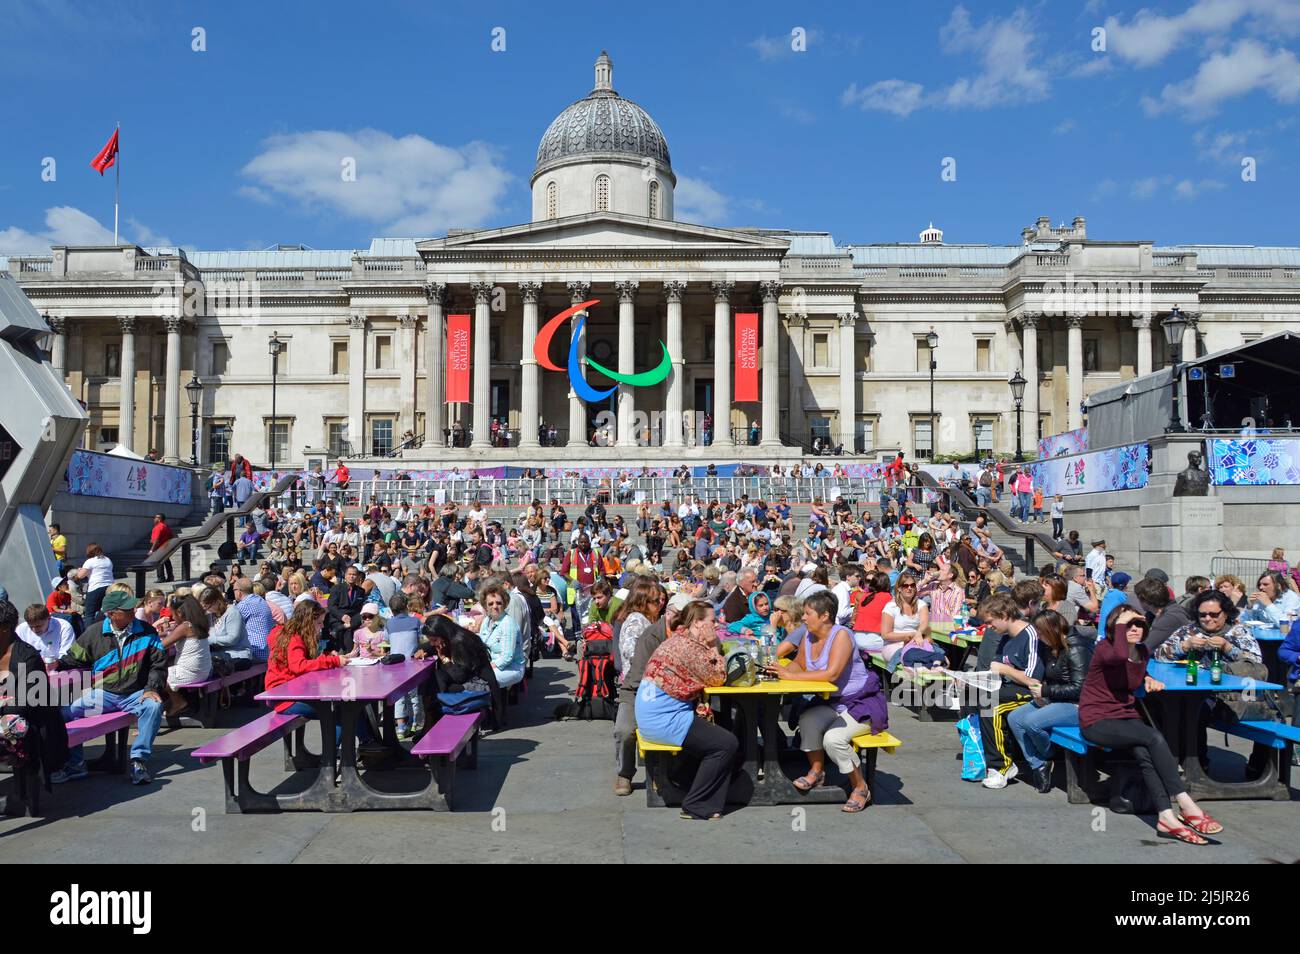 Tourists & visitors sit at coloured picnic tables in Trafalgar Square 2012 London Paralympic Games logo on colonnade of National Gallery England UK Stock Photo